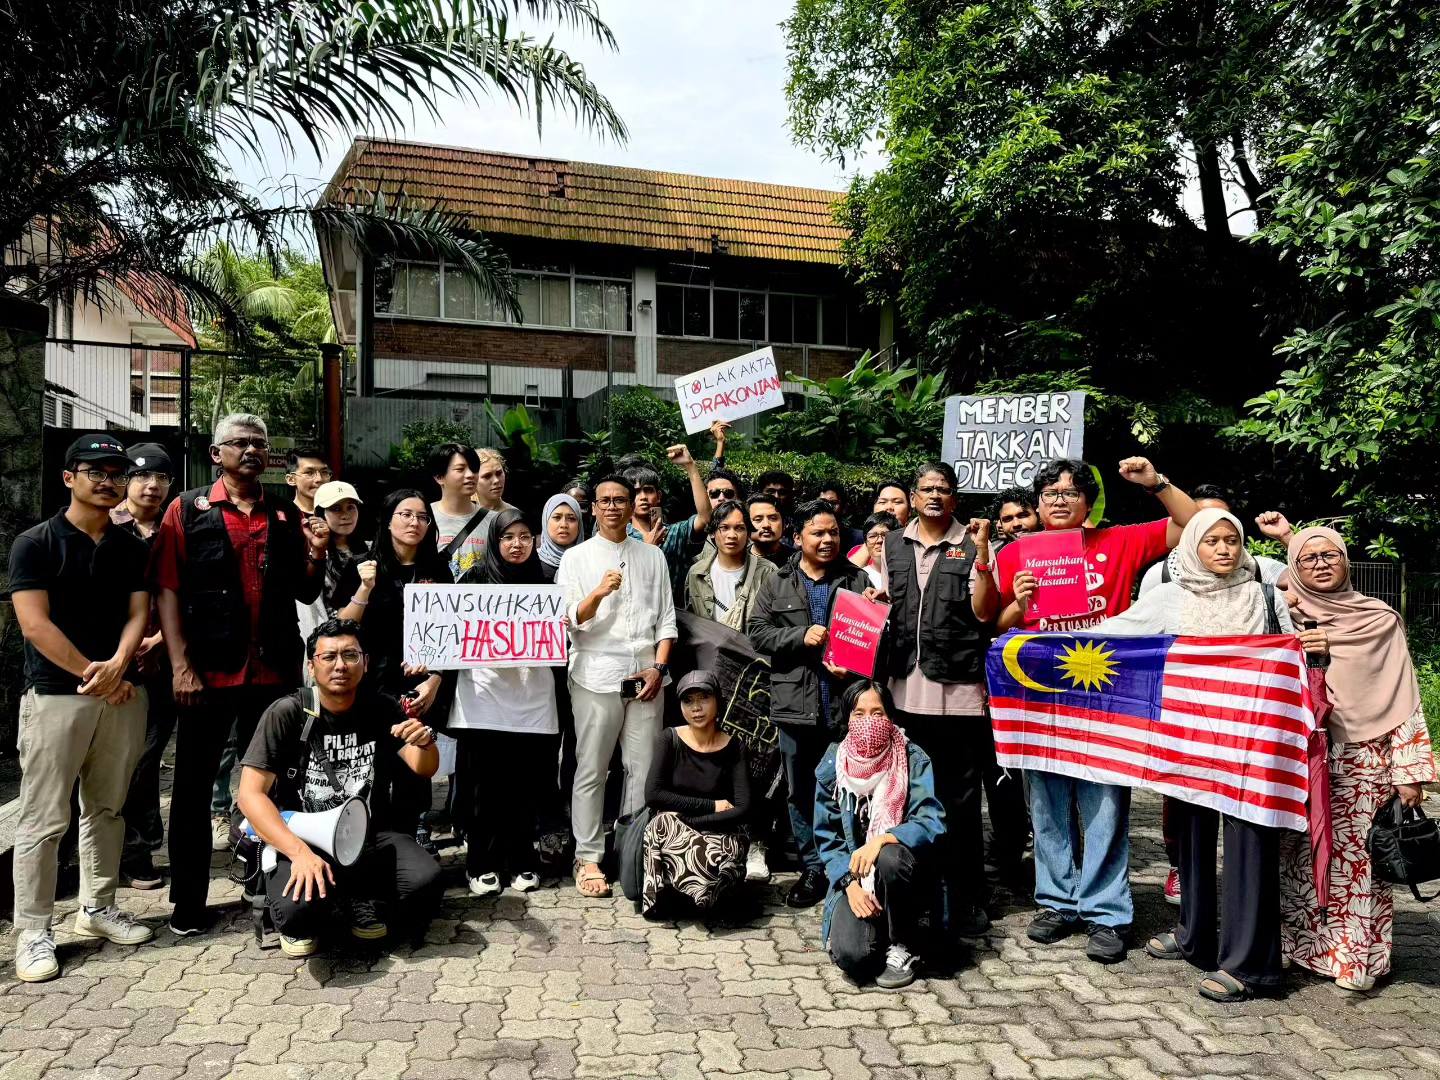 Bersih: Championing clean and fair elections in Malaysia